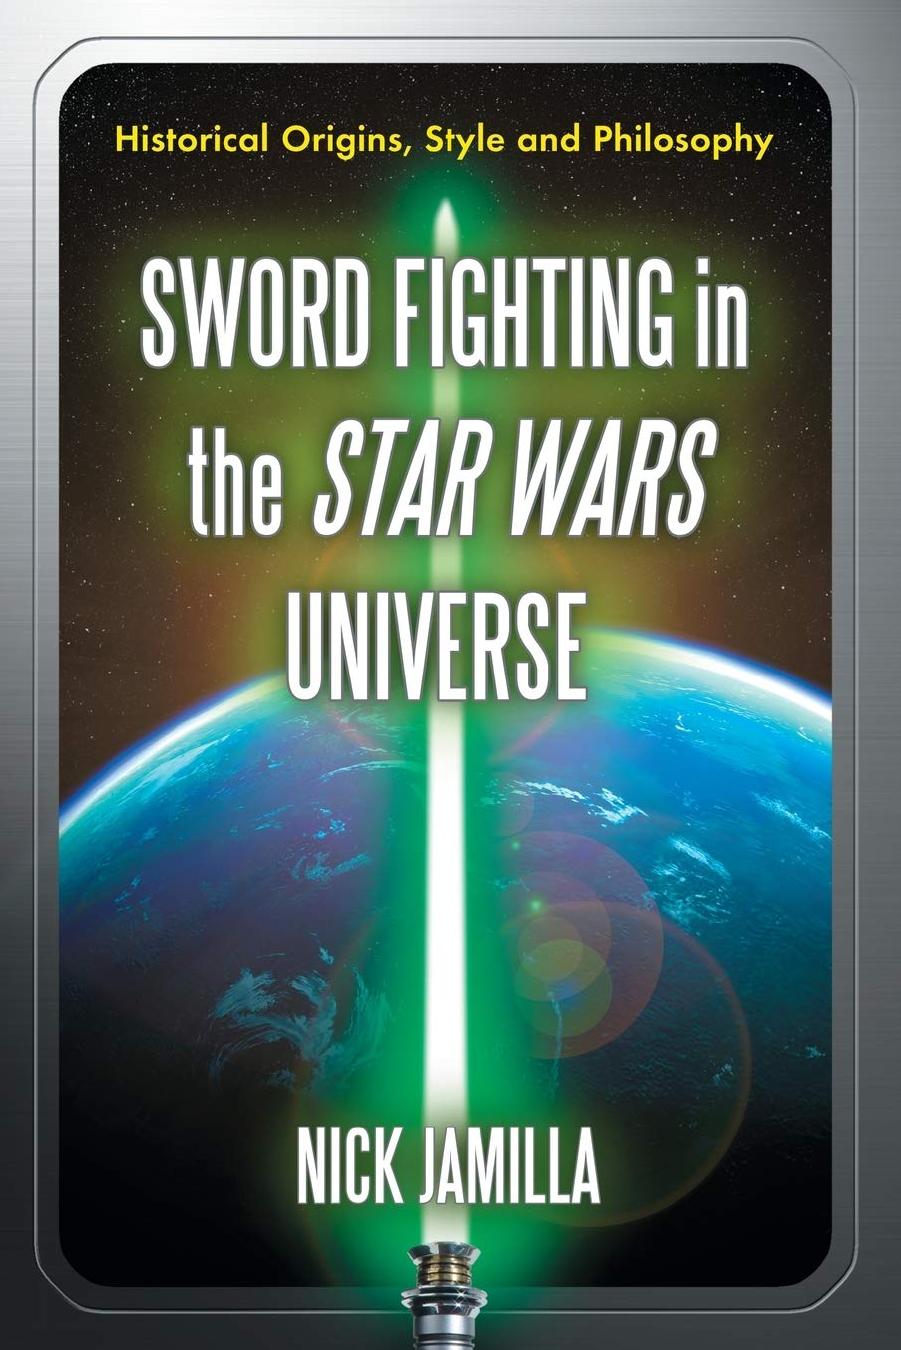 Sword Fighting in the Star Wars Universe: Historical Origins, Style and Philosophy by Nick Jamilla